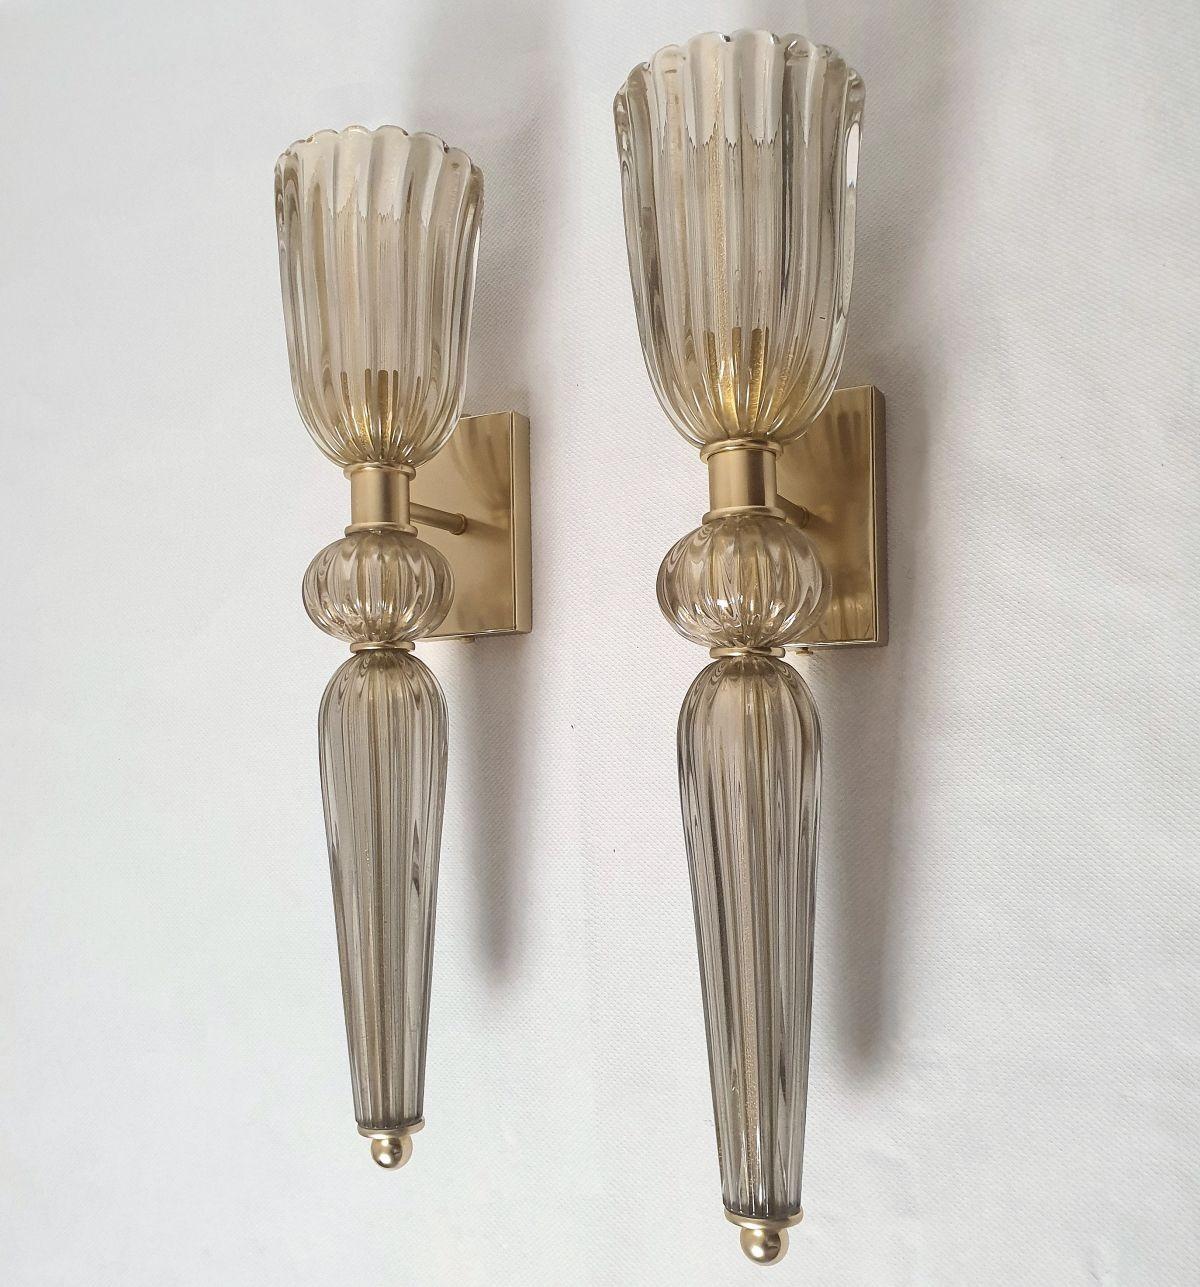 Pair of mid-century tall tan Murano Glass Sconces, attributed to Barovier, Italy 1970s.
The Torchiere style sconces are made of a hand blown thick tan color Murano glass.
The thickness of the glass makes it translucent; when lit they create a warm